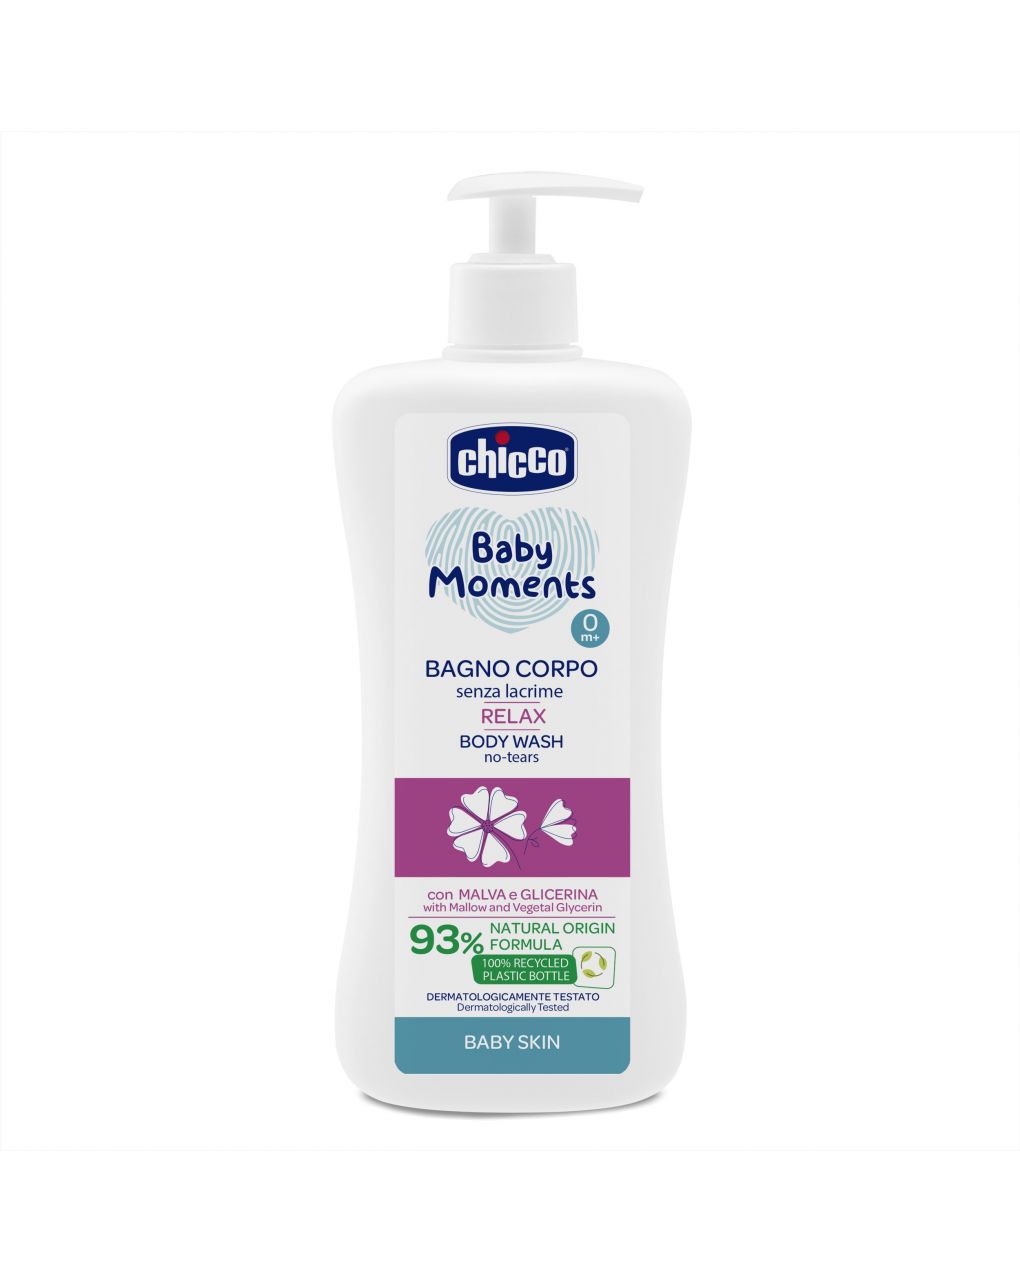 Bagno corpo relax baby moments chicco baby skin - Chicco